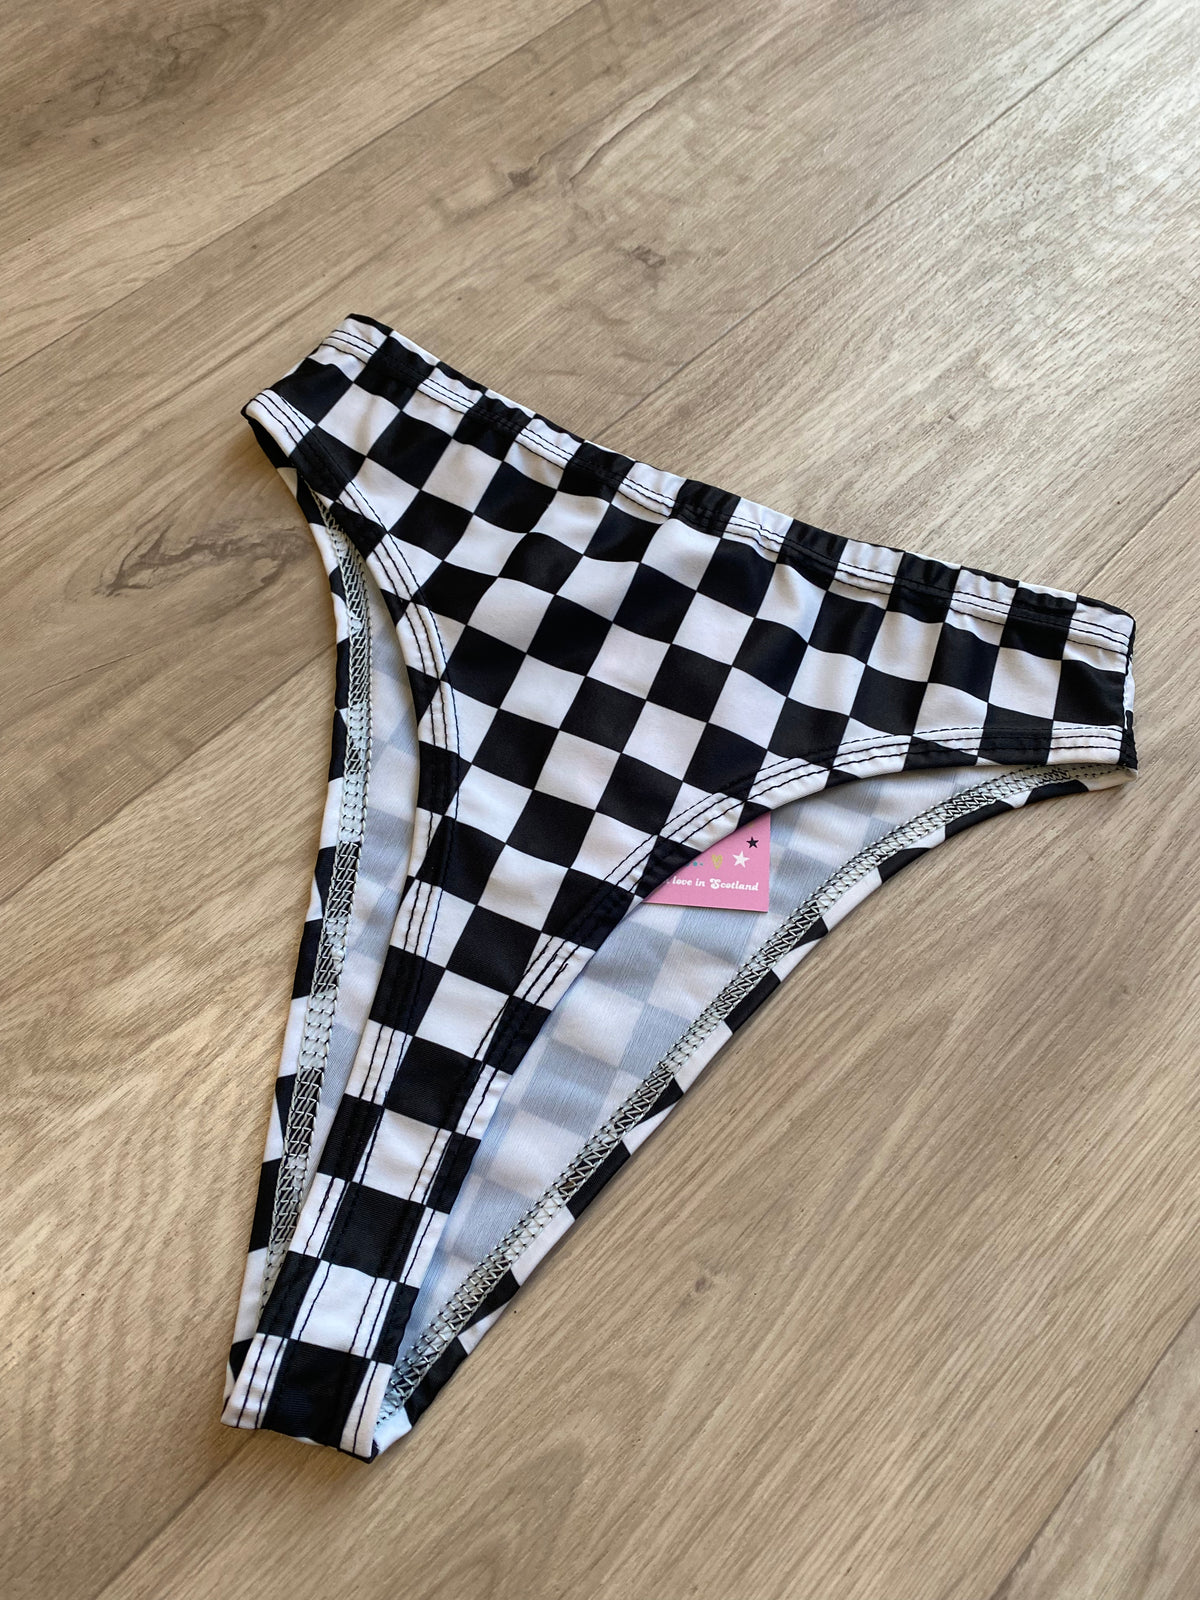 BLACK AND WHITE CHEQUERED THONG BOTTOMS SIZE UK 6/US 2 SAMPLE SALE